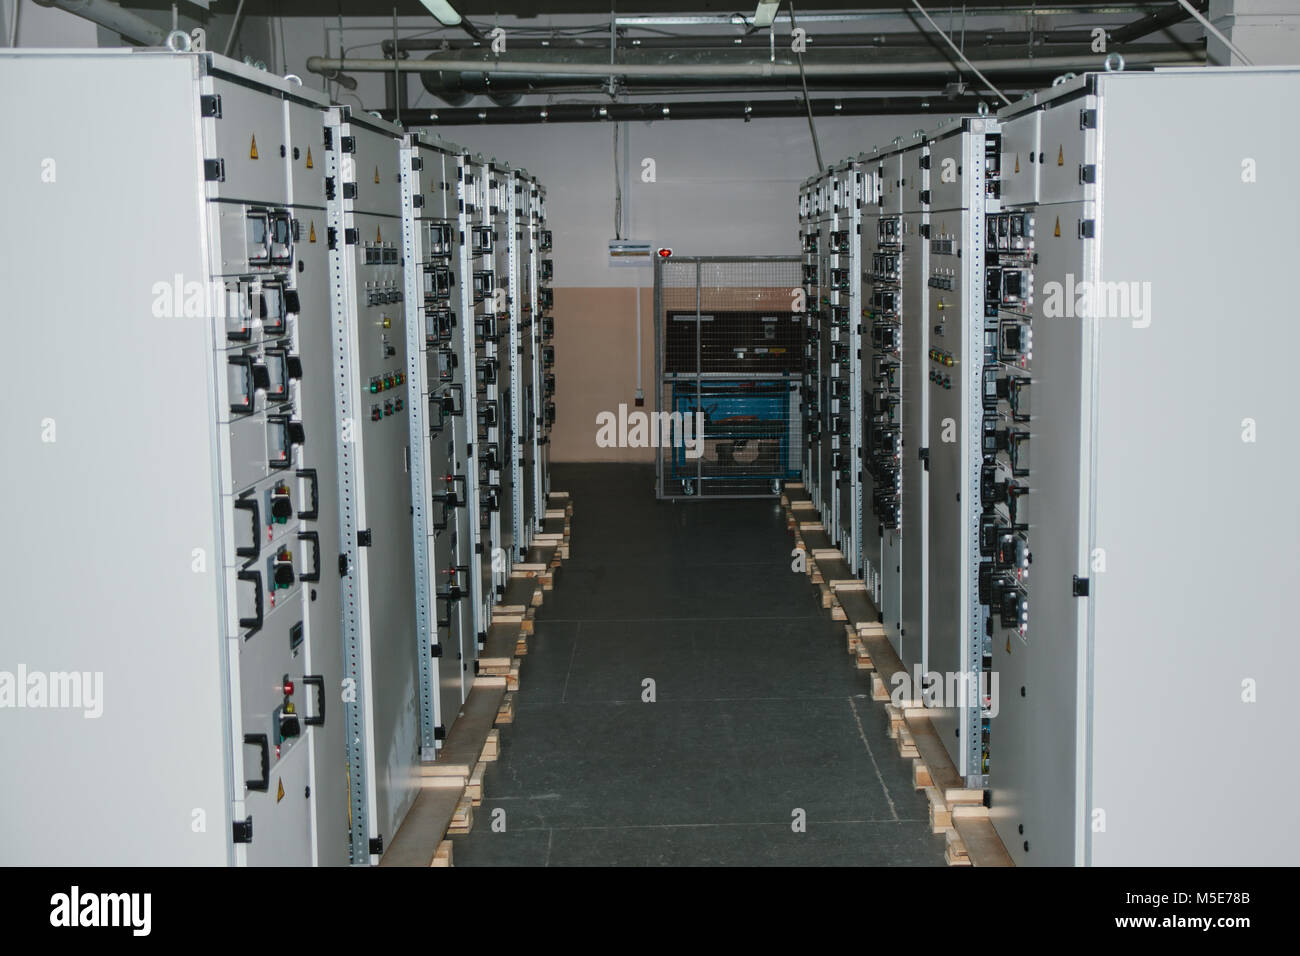 Manufacture of low-voltage cabinets. Modern smart technologies in the electric power industry. The use of electrical energy in industry. Stock Photo